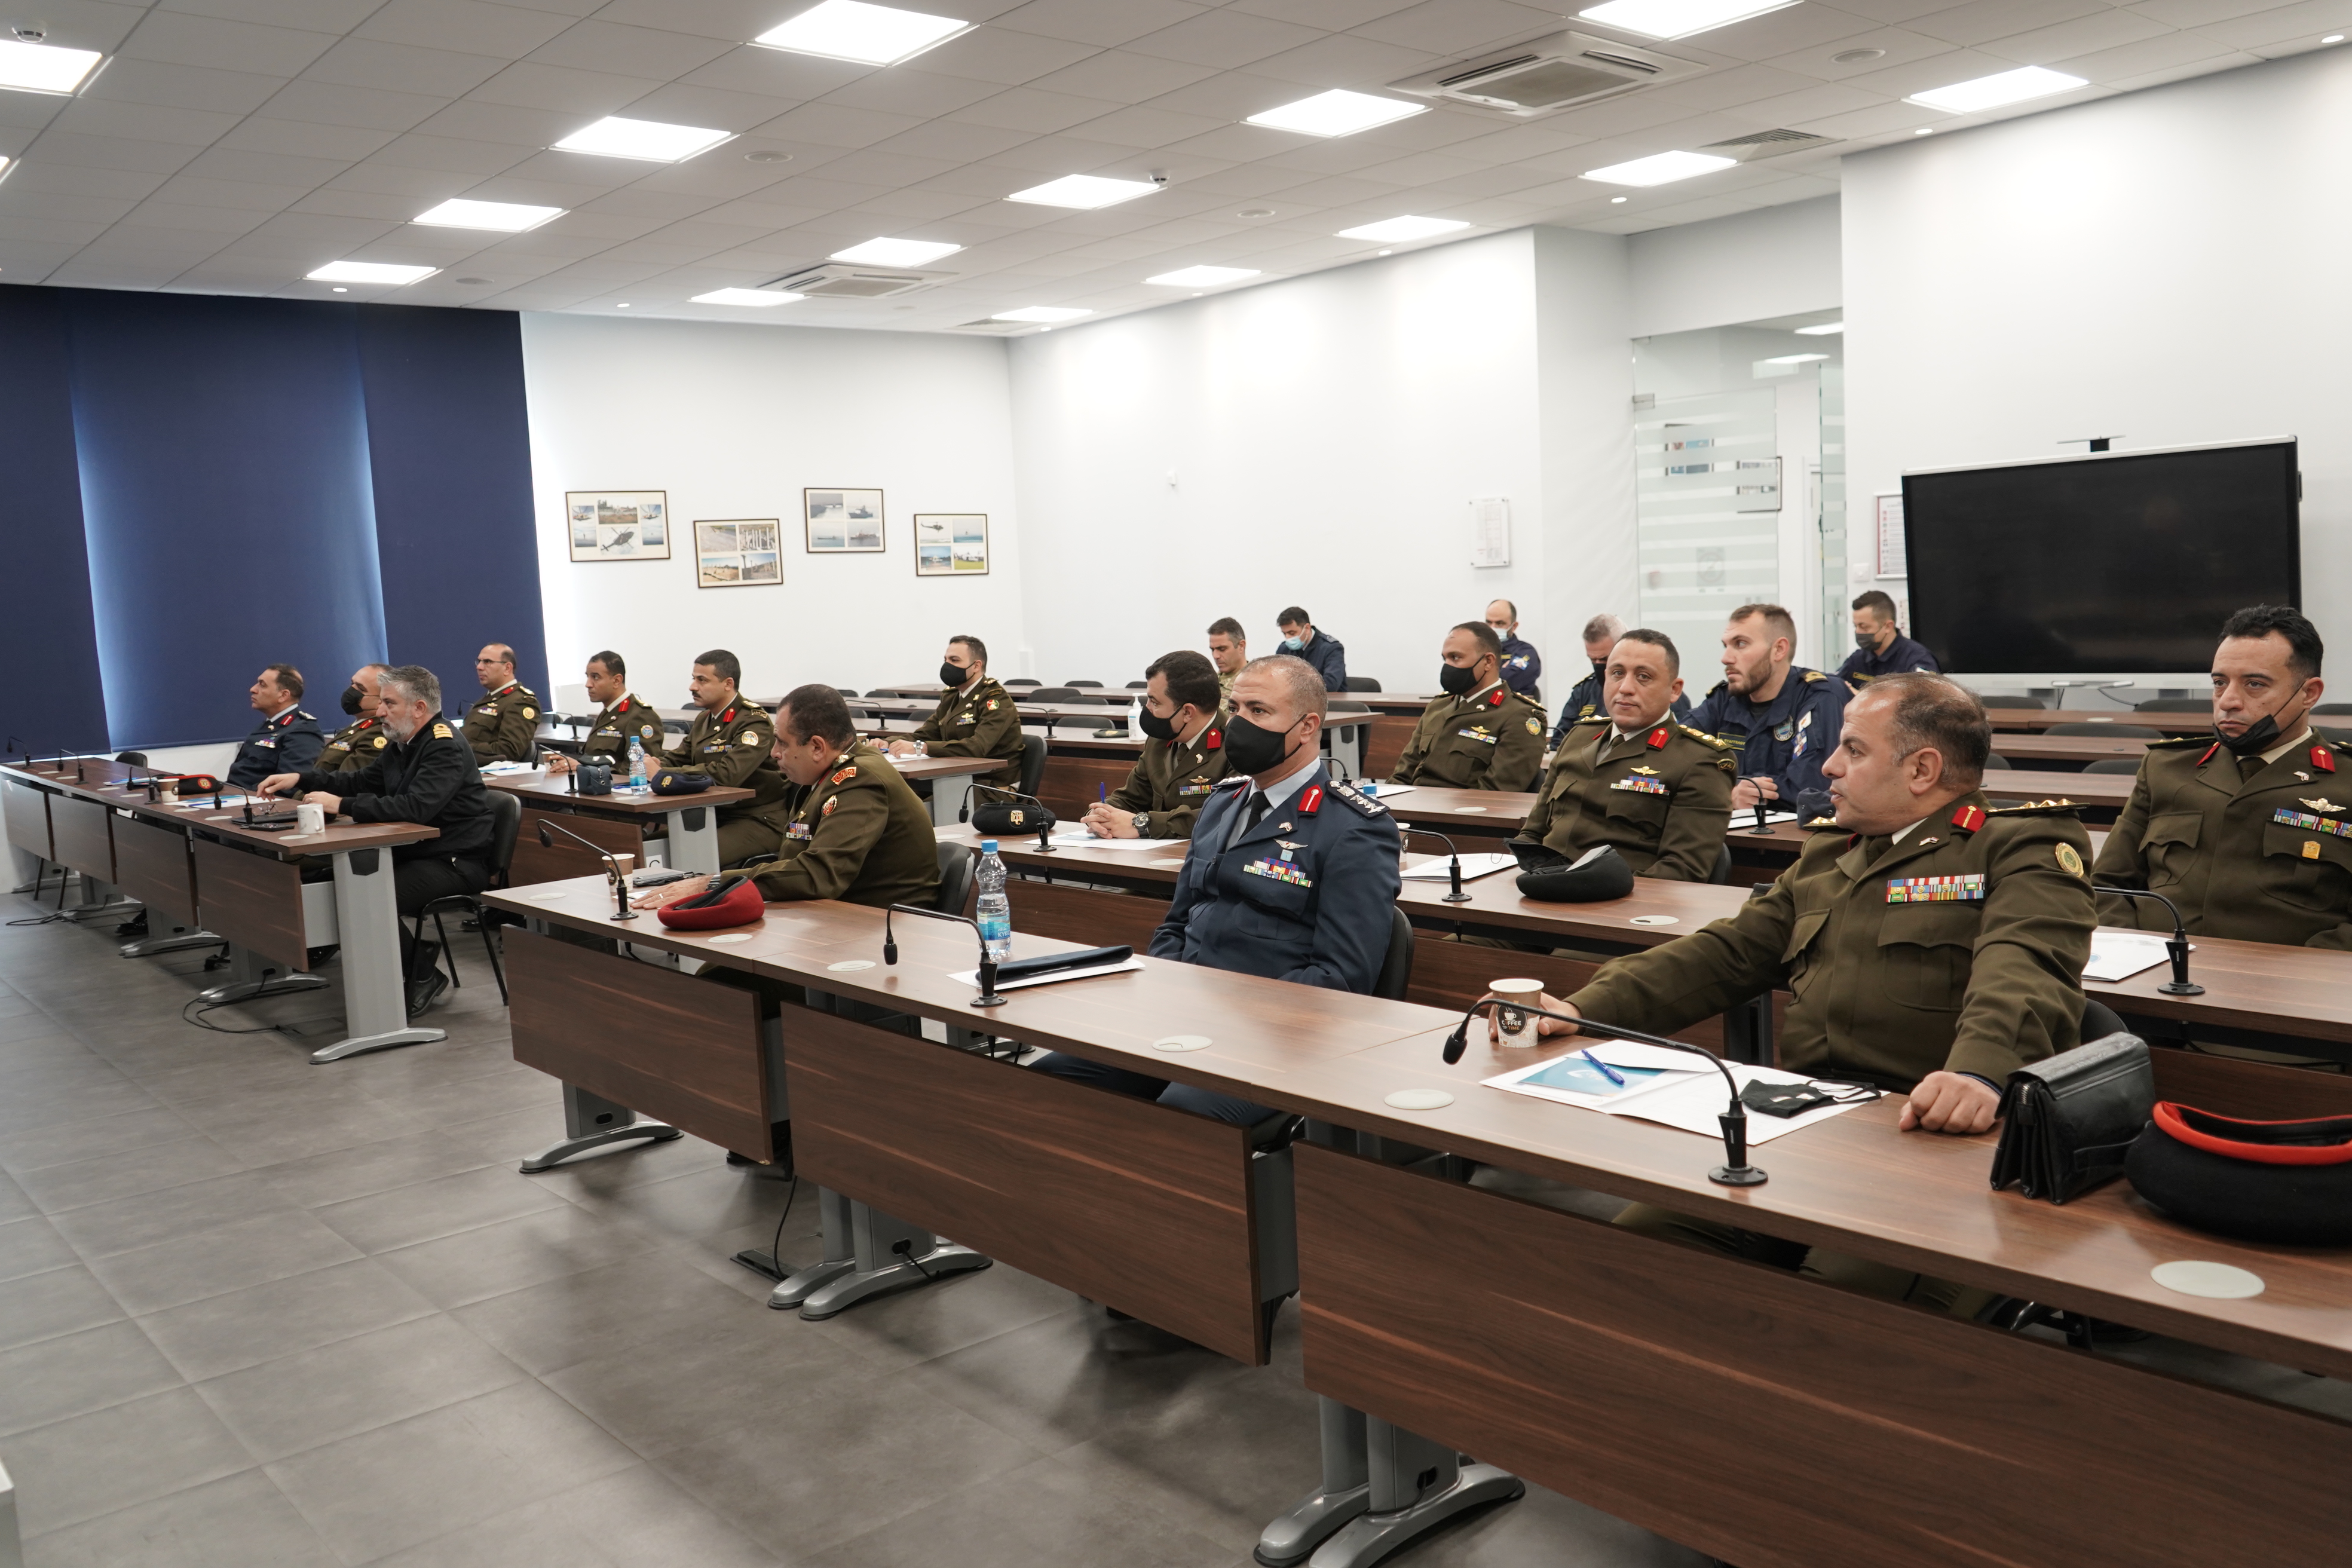 Visit of the Egyptian National Defence School (Nasser High Military Academy) delegation at the JRCC